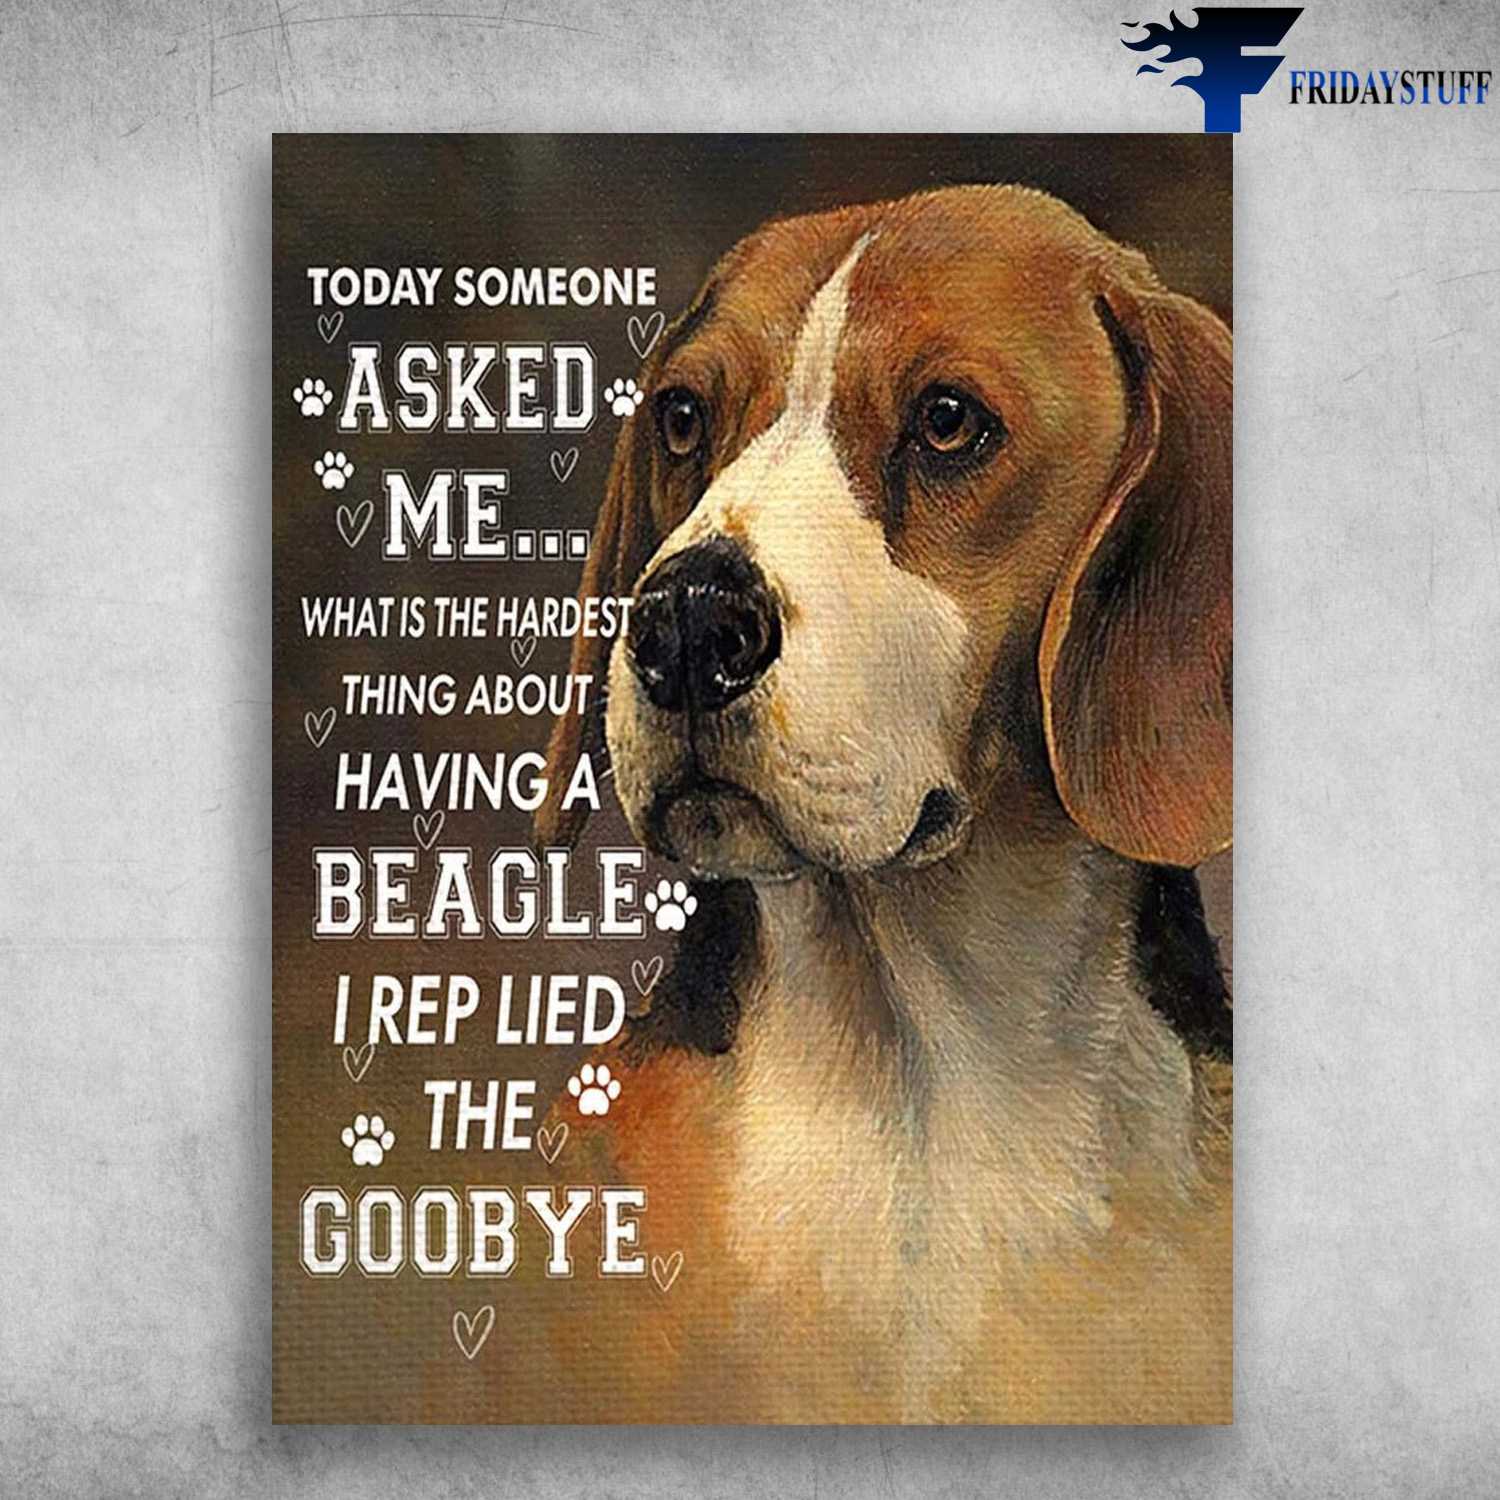 Beagle Dog - Today Someone Asked Me, What Is The Hardest Thing, About Having A Beagle